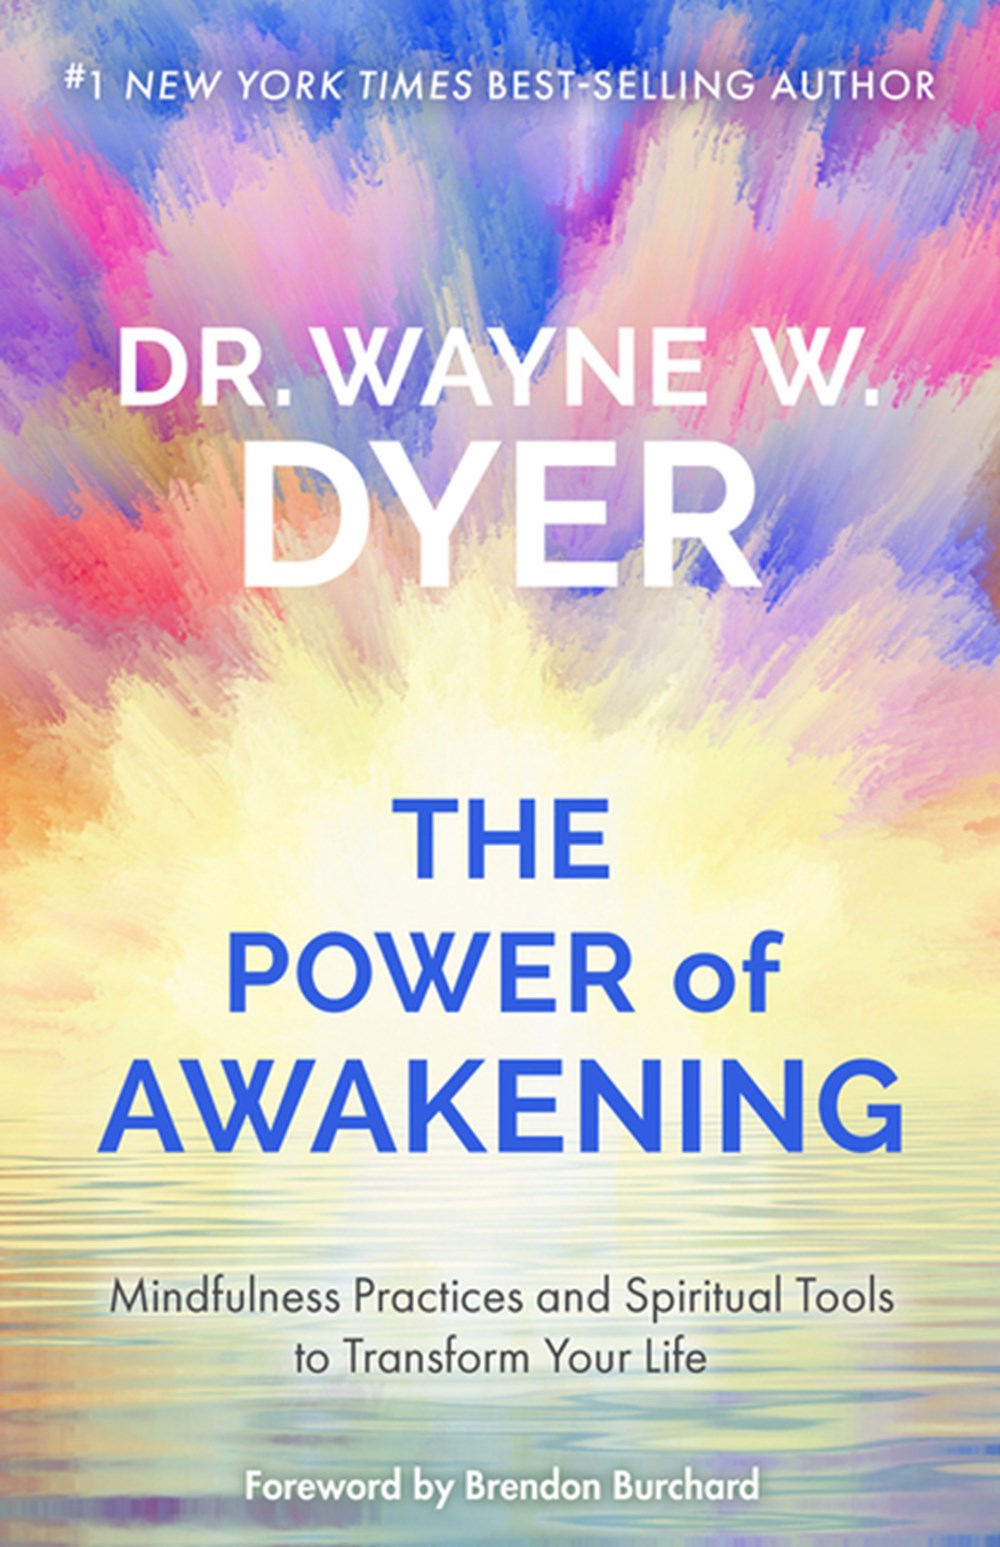 Power of Awakening: Mindfulness Practices and Spiritual Tools to Transform Your Life